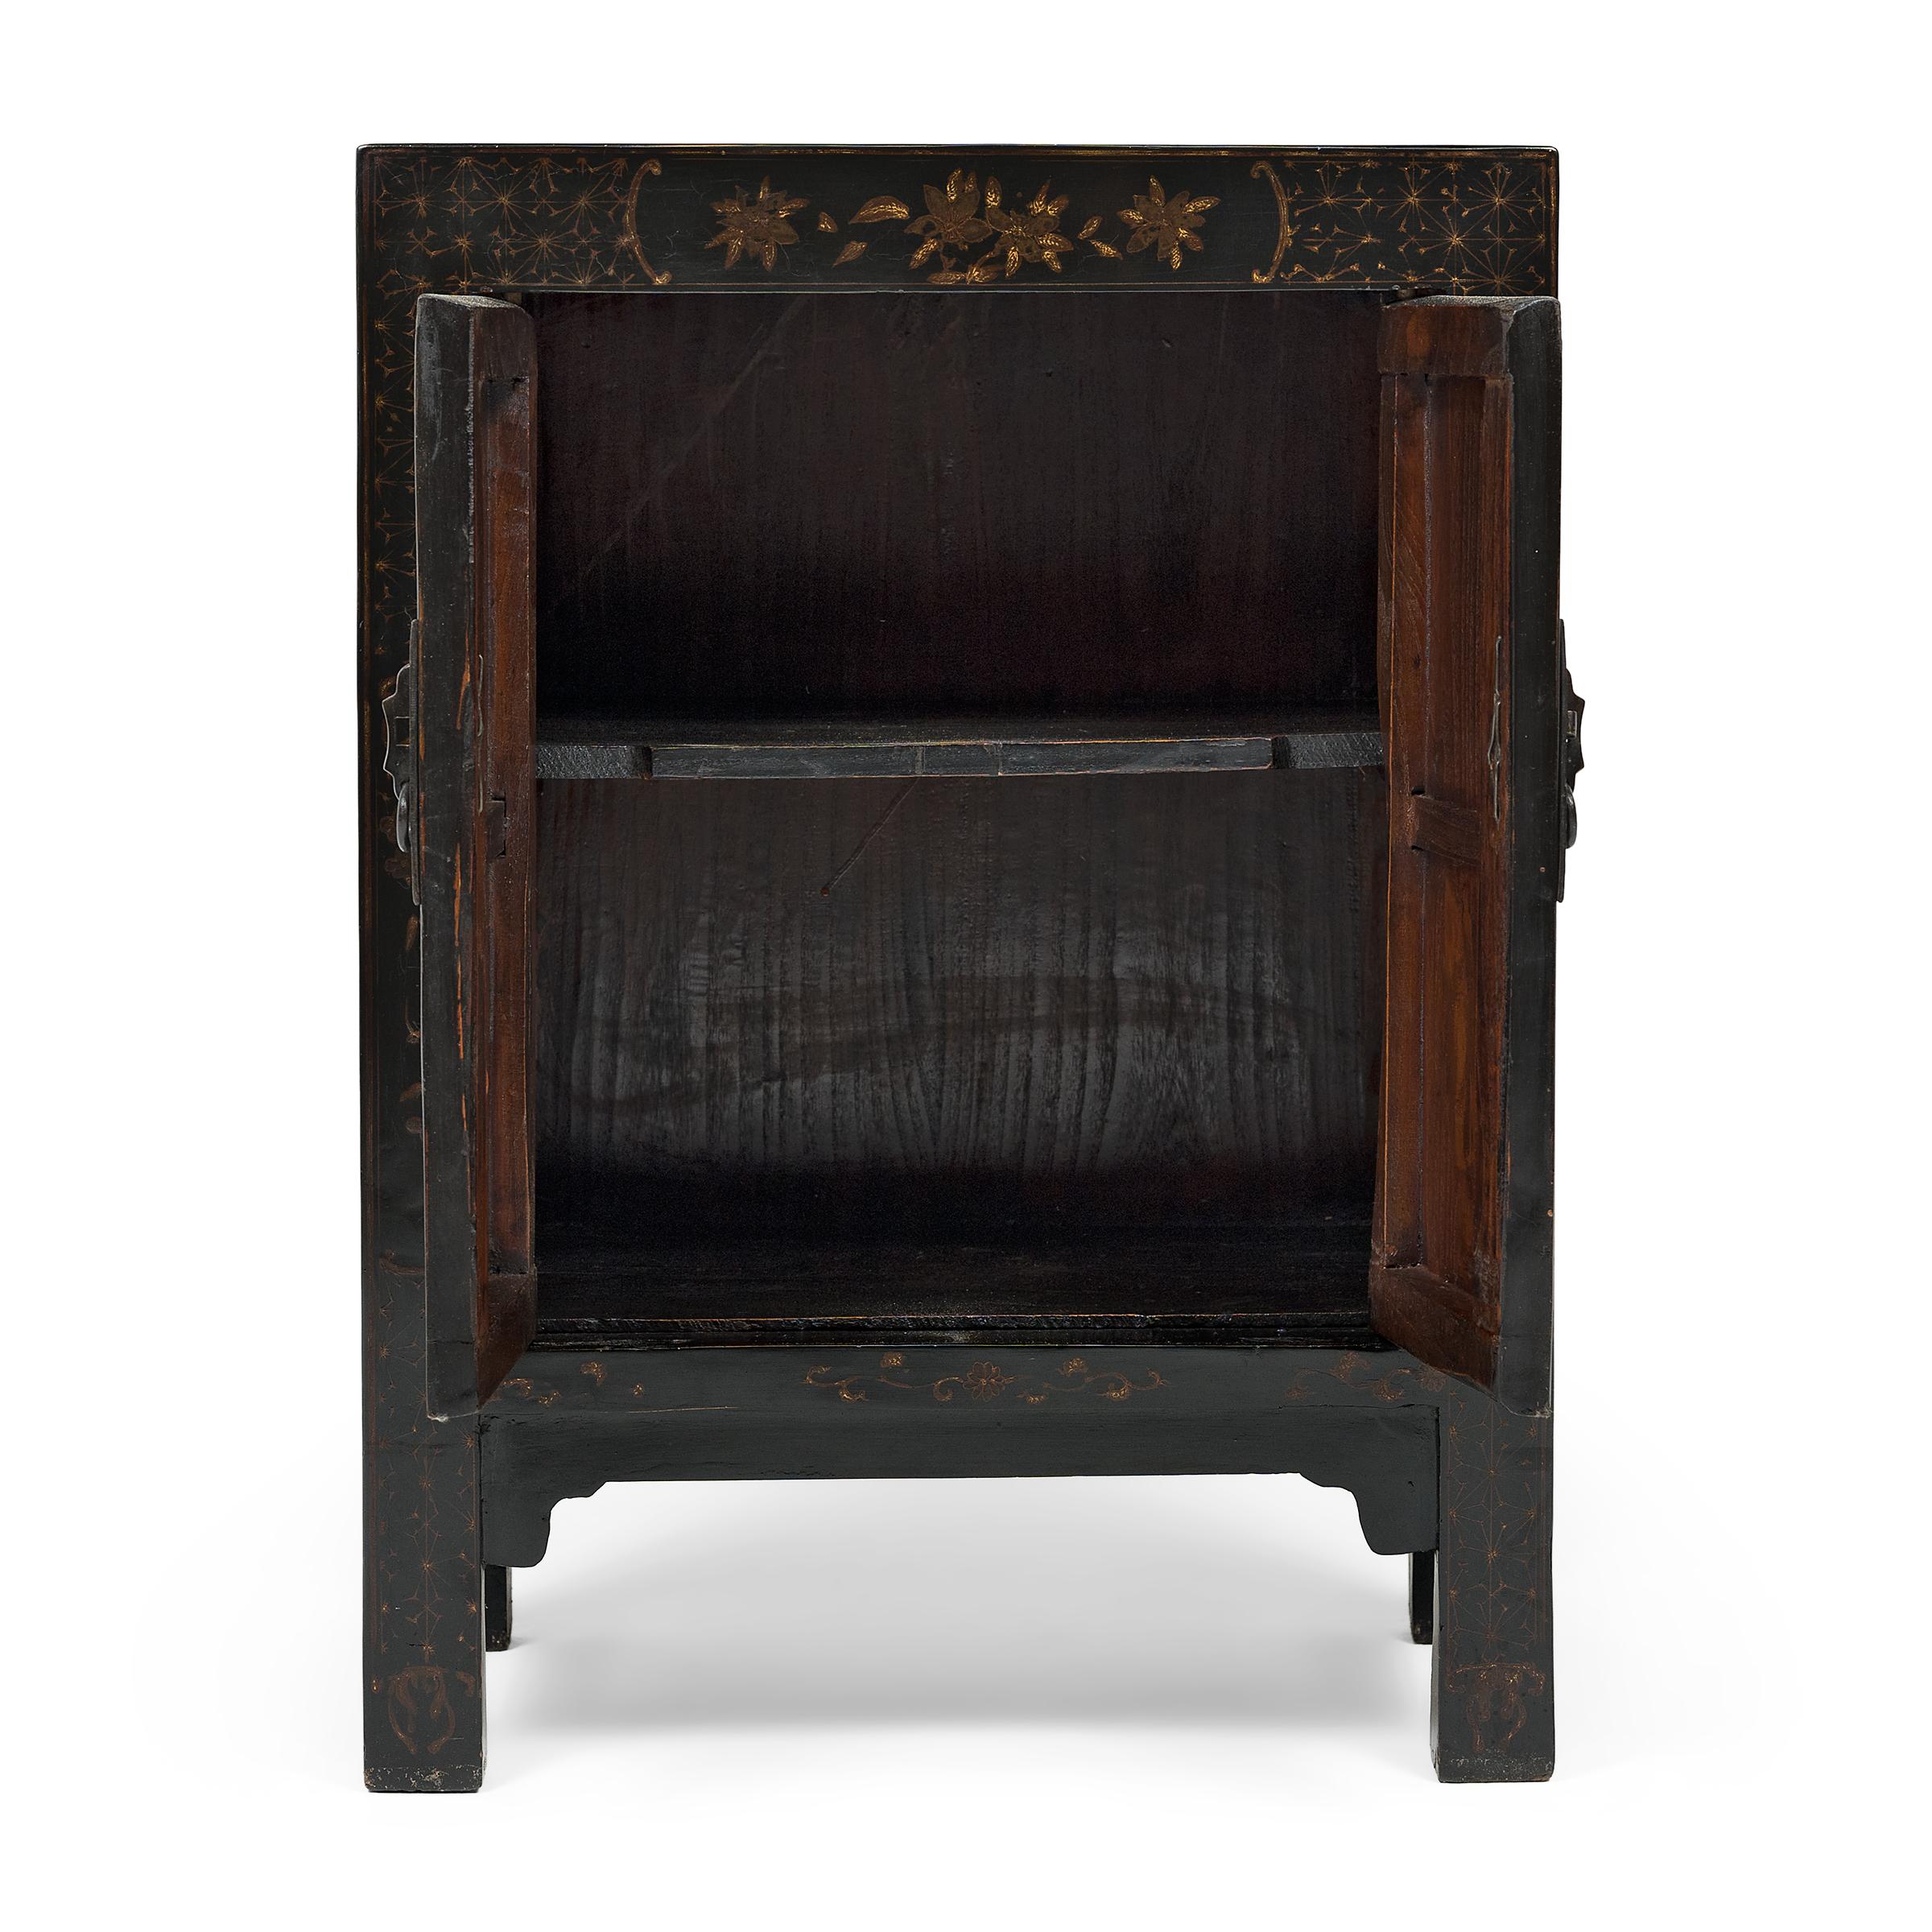 With clean lines and a dark lacquer finish, this small square corner cabinet provides the perfect canvas for intricate, hand-painted gilt decoration. Dated to the mid-19th century, the low chest is crafted of elmwood with a single interior shelf and